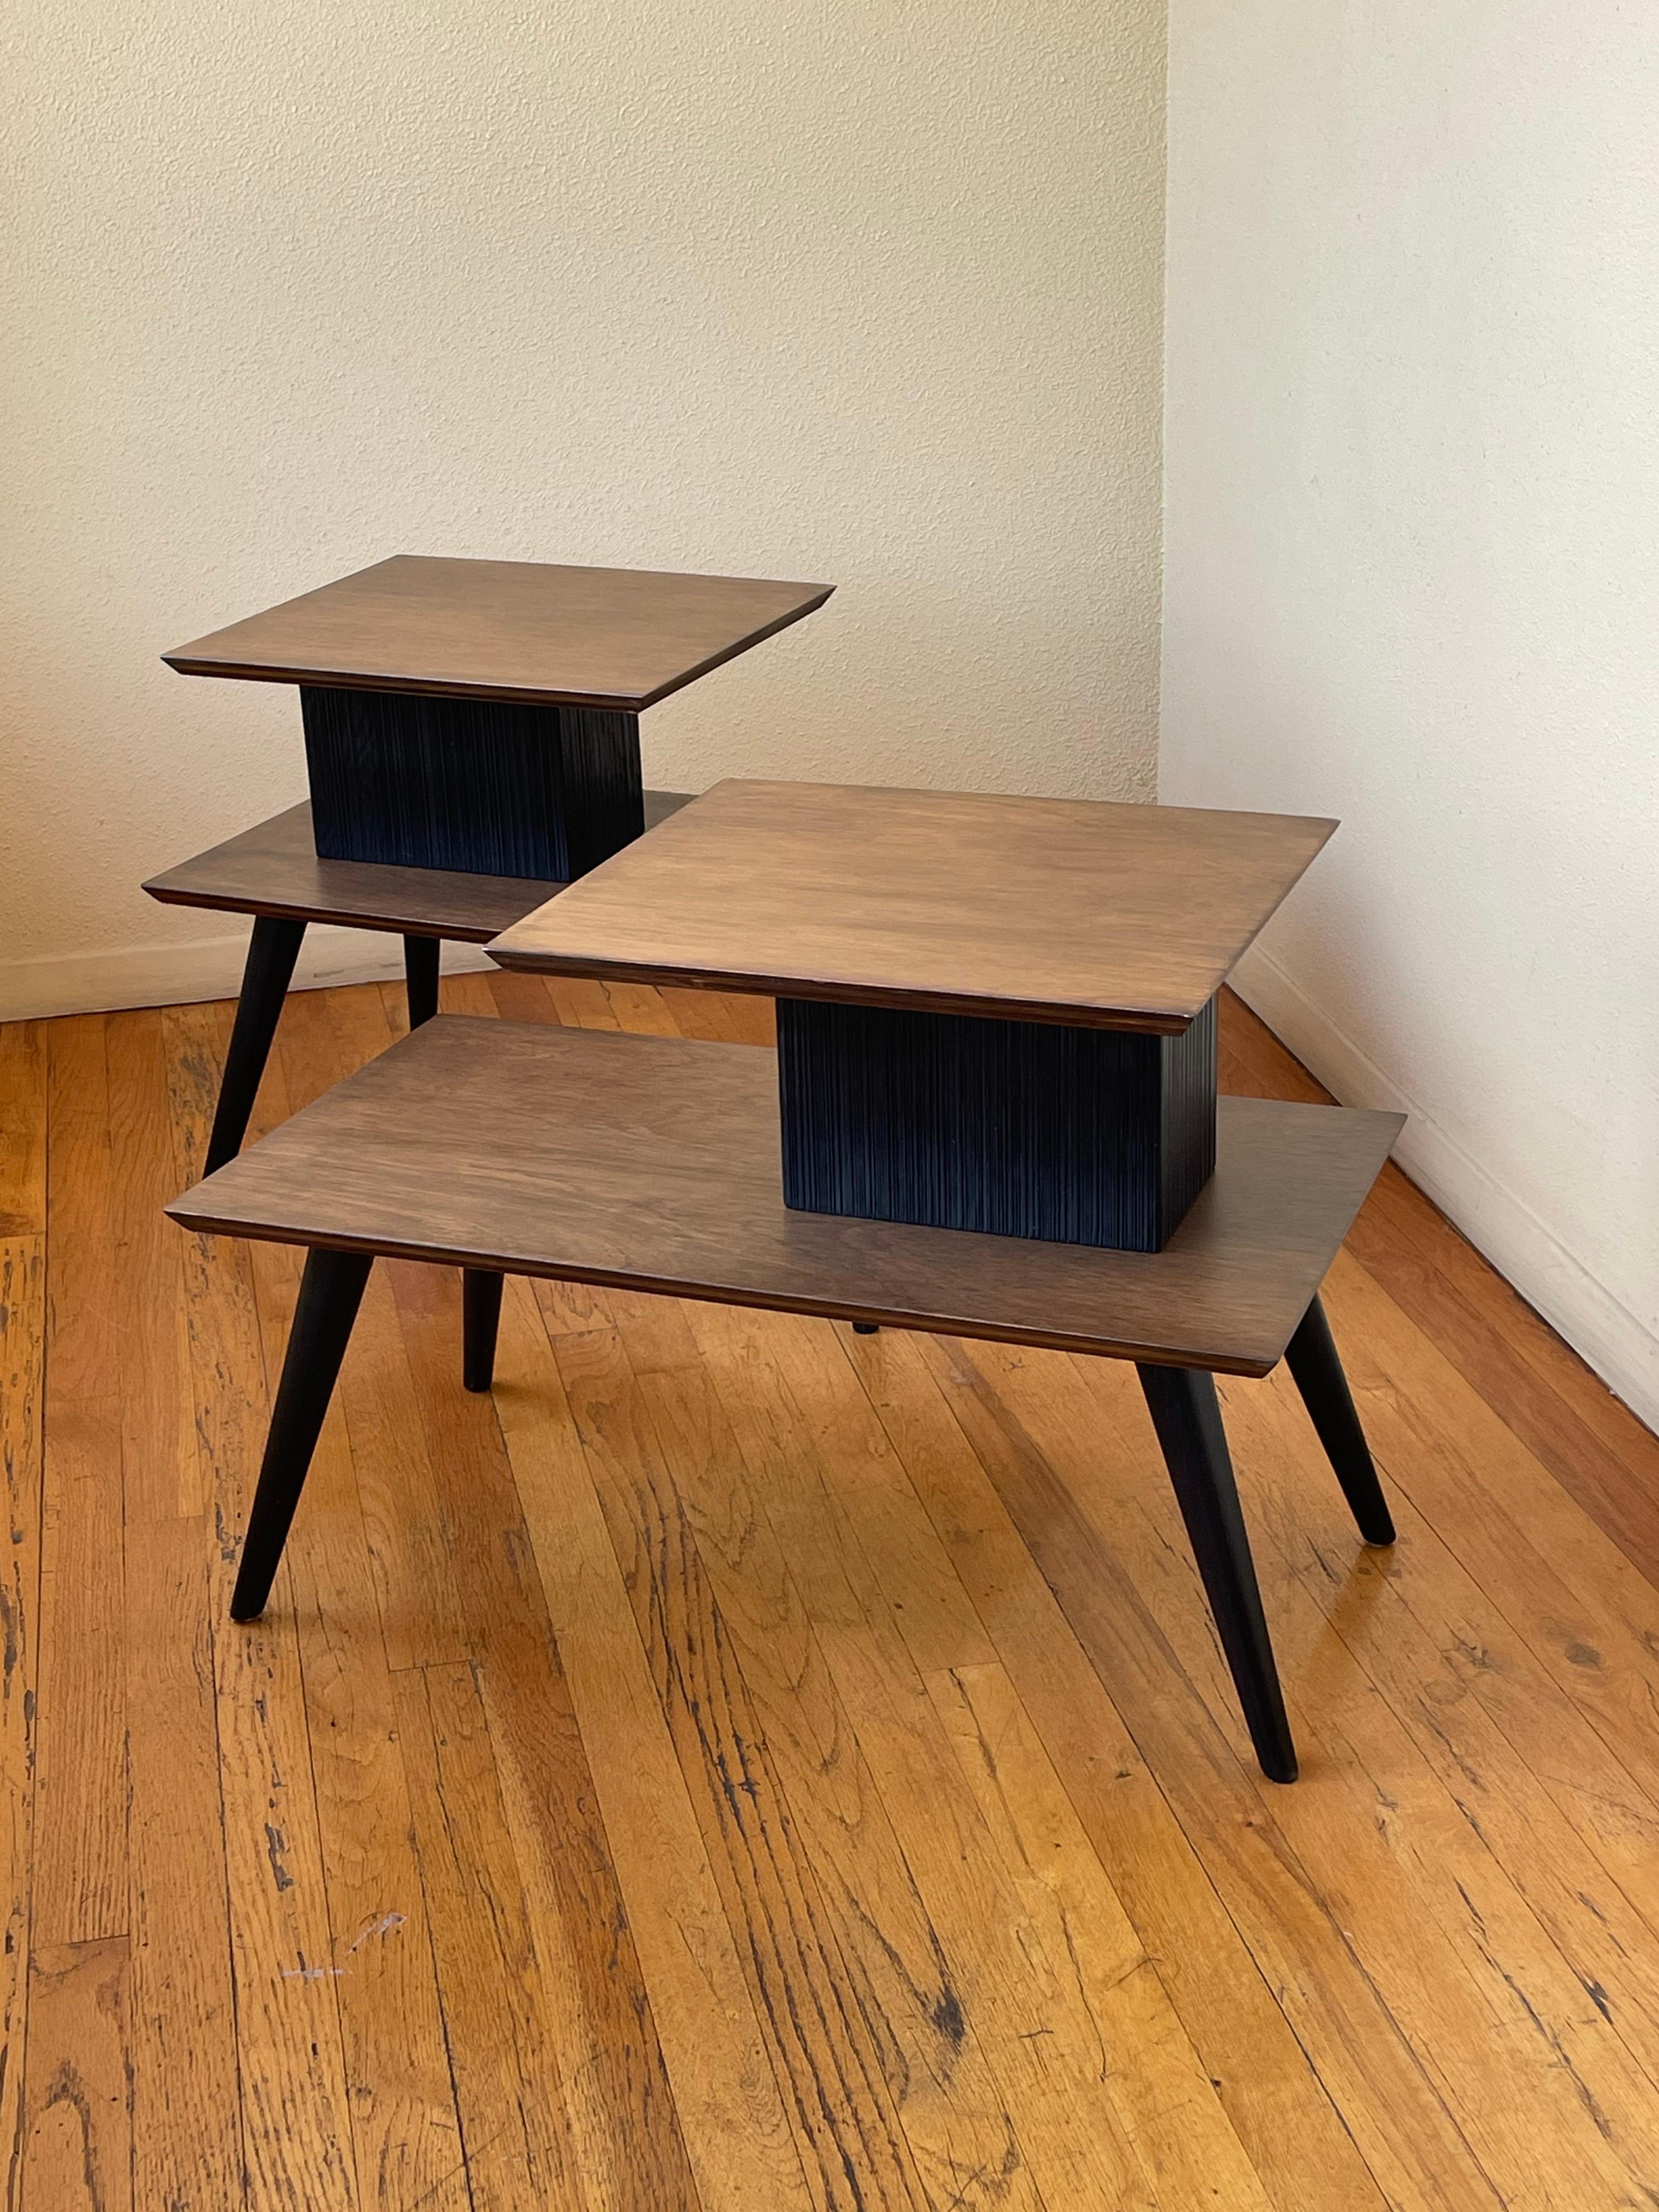 Very rare of atomic age step end tables designed by Paul Frankl, circa 1950's in walnut finish with black lacquer accents, freshly refinished very rare set hard to find.